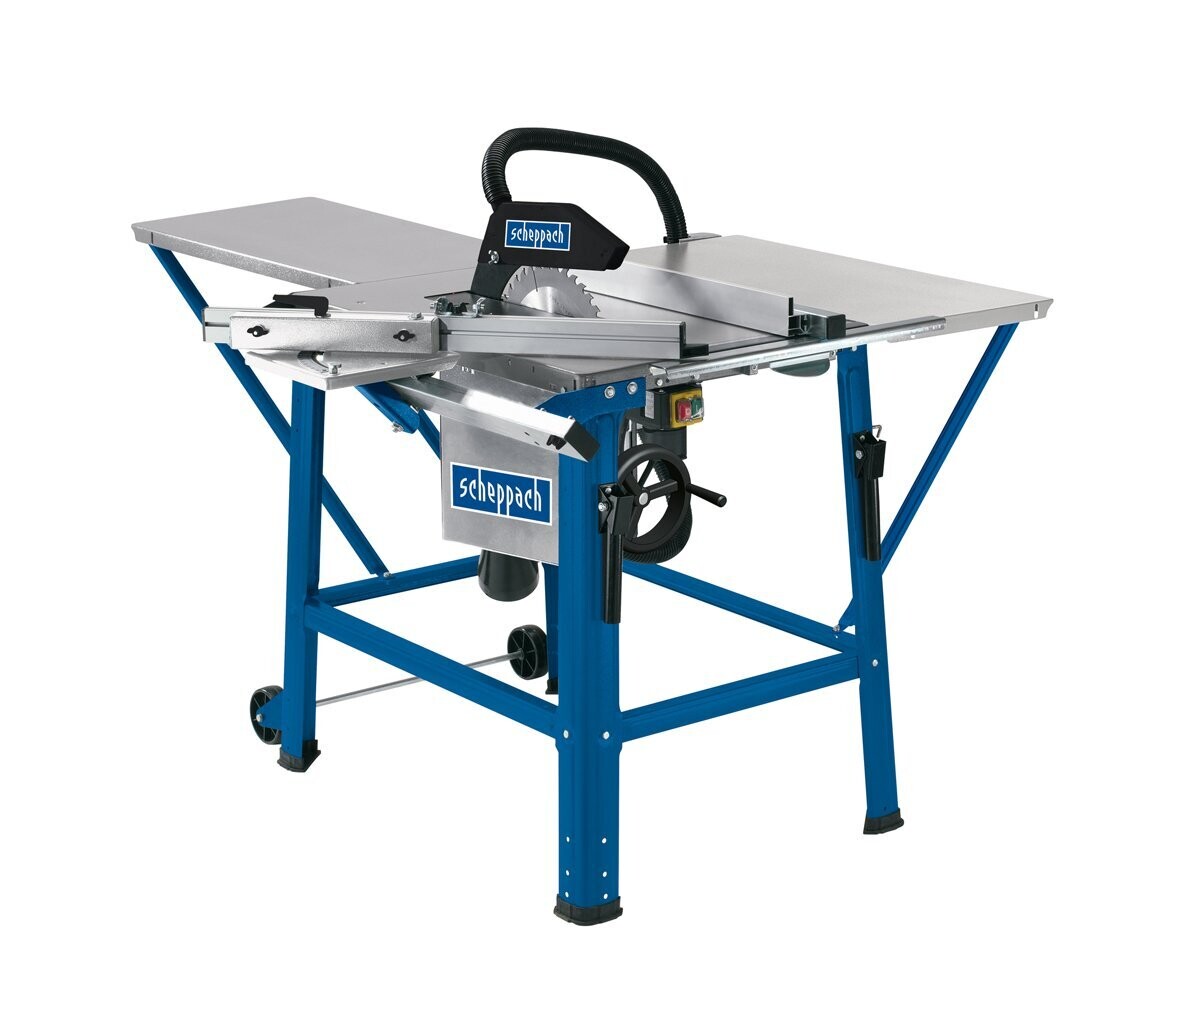 Scheppach TS310 315mm Tilt Arbour Sawbench 230v
( Available with Free of Charge UK Mainland Delivery)